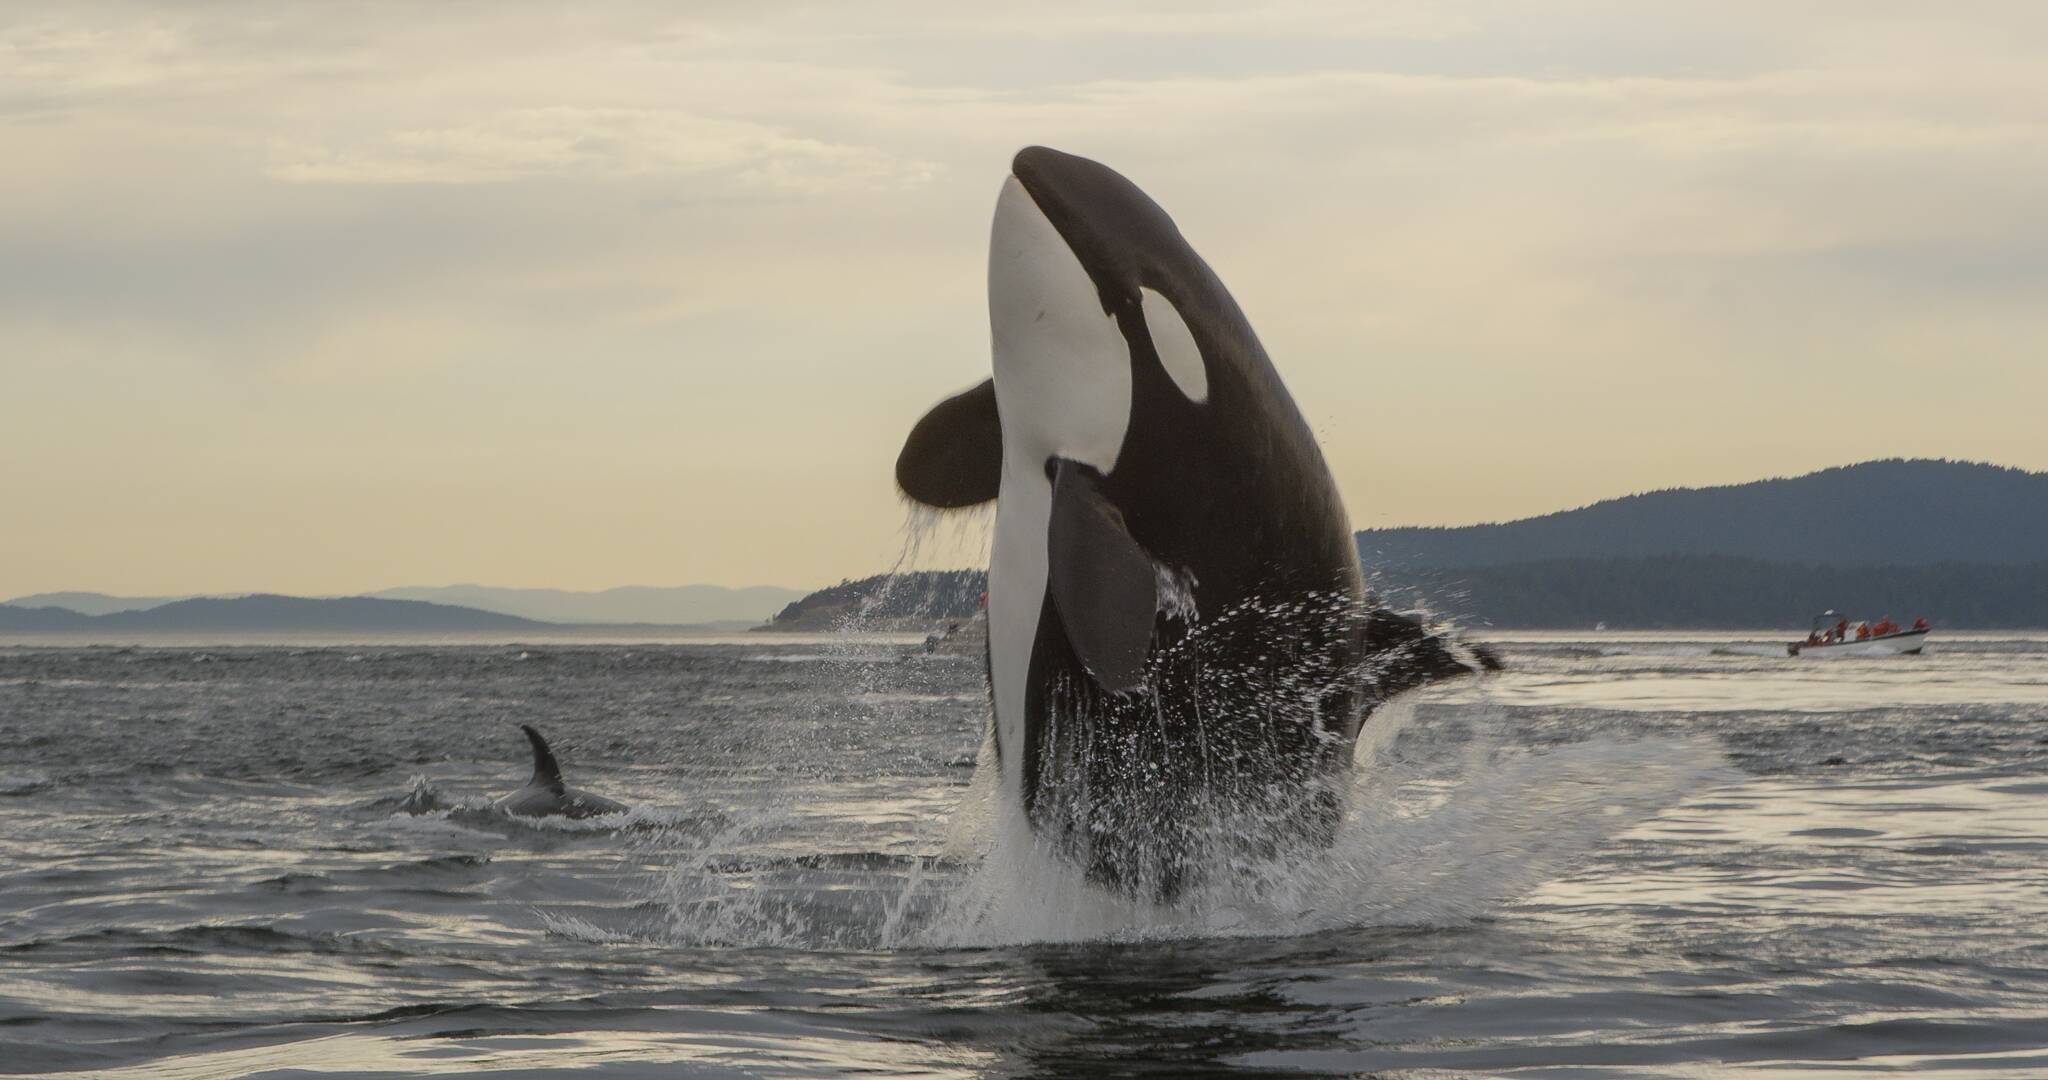 An orca surfaces in the Salish Sea. (Photo by Florian Graner)